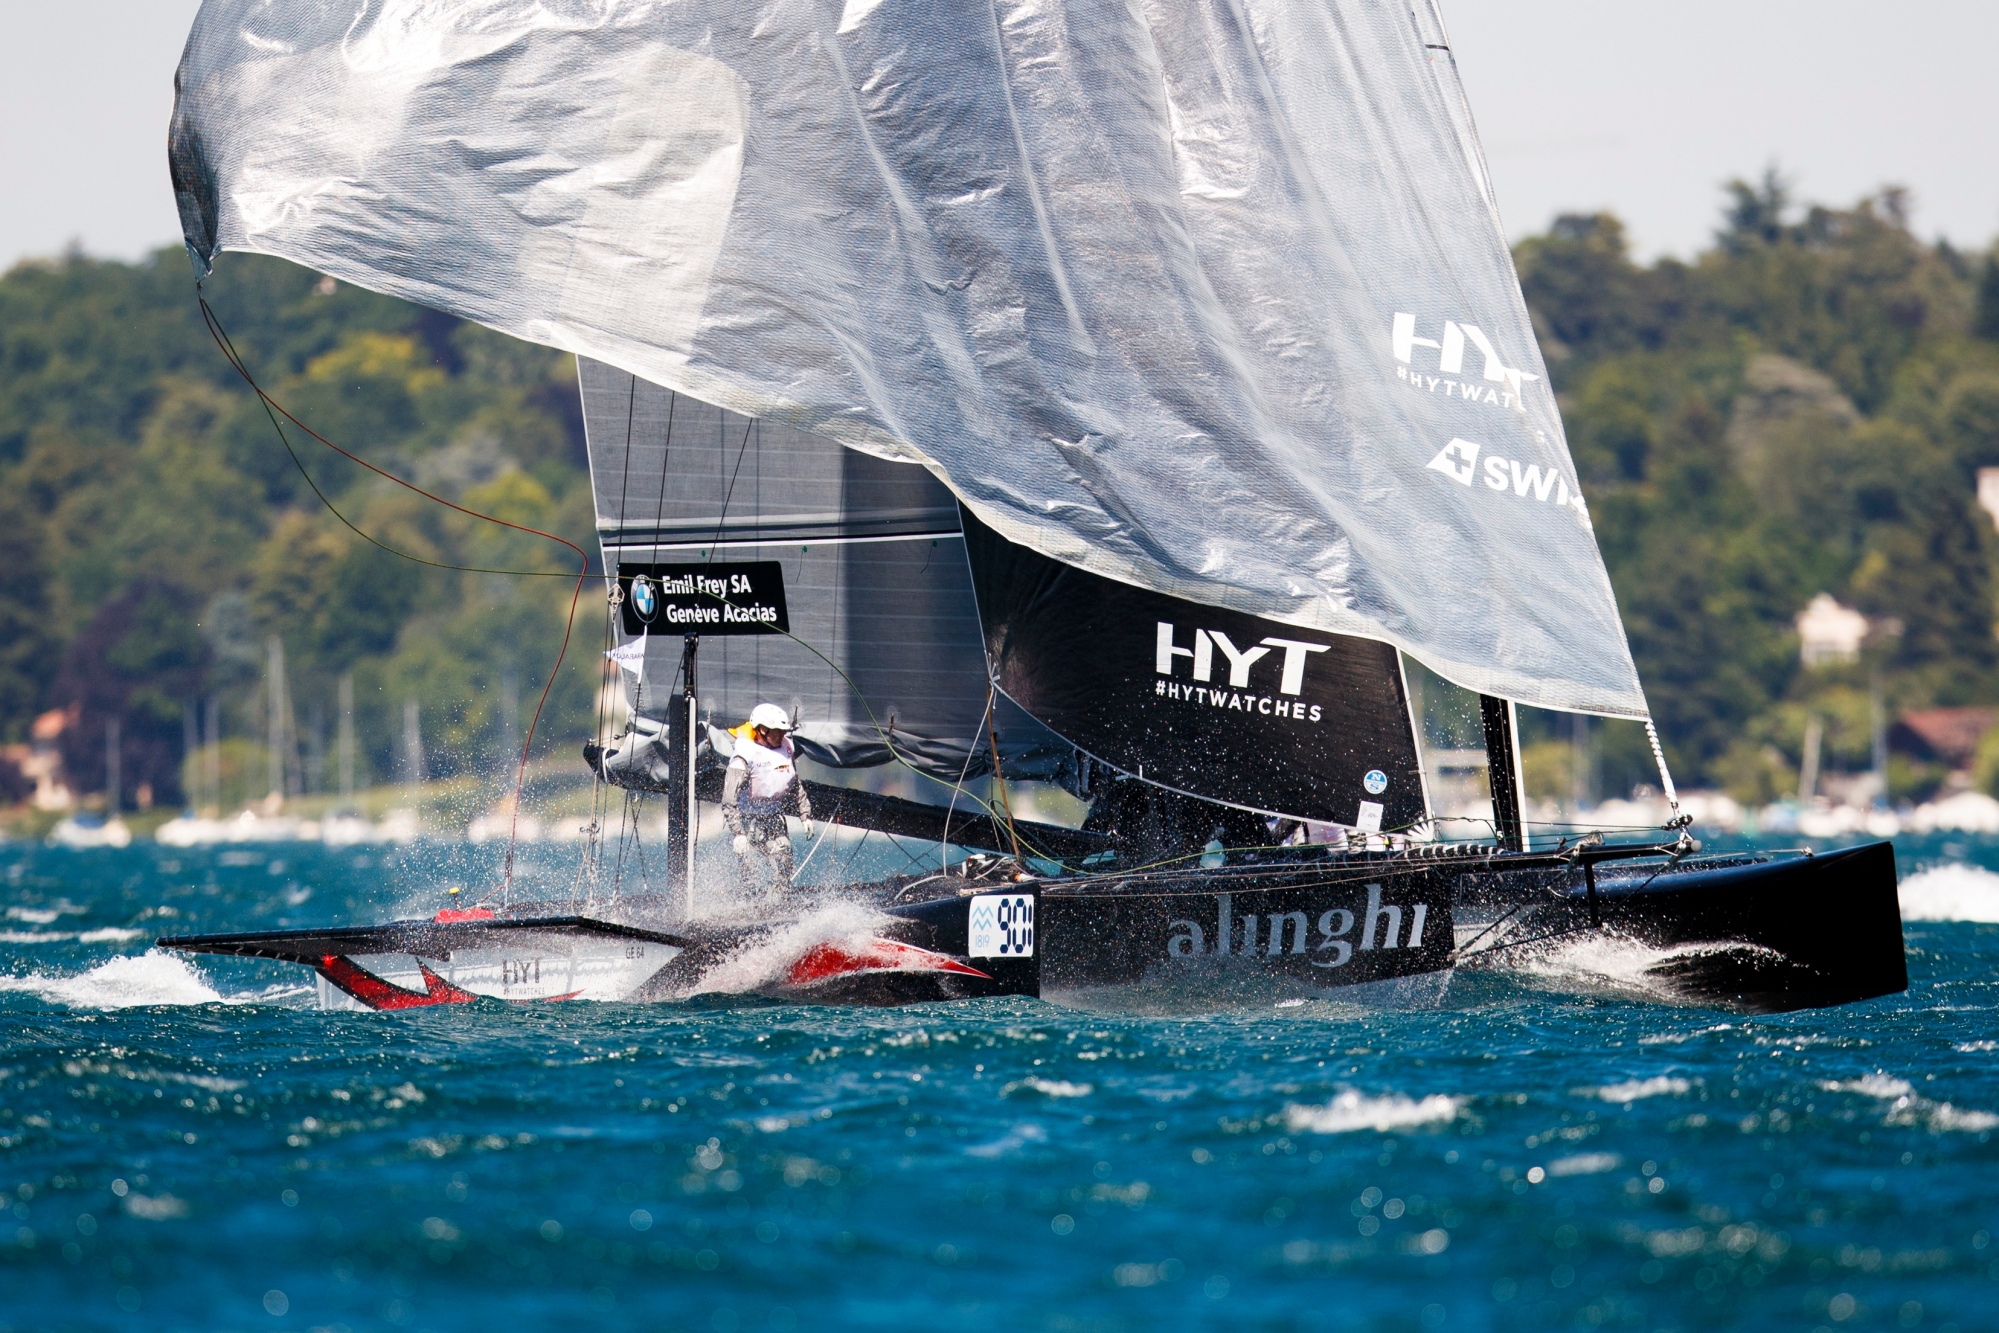 M1 class, D35 sailboat "Alinghi 1" approaches the finish line to complete the race in 5 hours 11 minutes and 6 seconds and win the 79th "Bol d'Or" sailing race on Lake Geneva, in Geneva, Switzerland, on Saturday, June 17, 2017. About 550 boats participate in this weekend's Bol d'Or, the largest sailing race held on a lake in Europe. (KEYSTONE/Valentin Flauraud) SWITZERLAND SAILING BOL D'OR